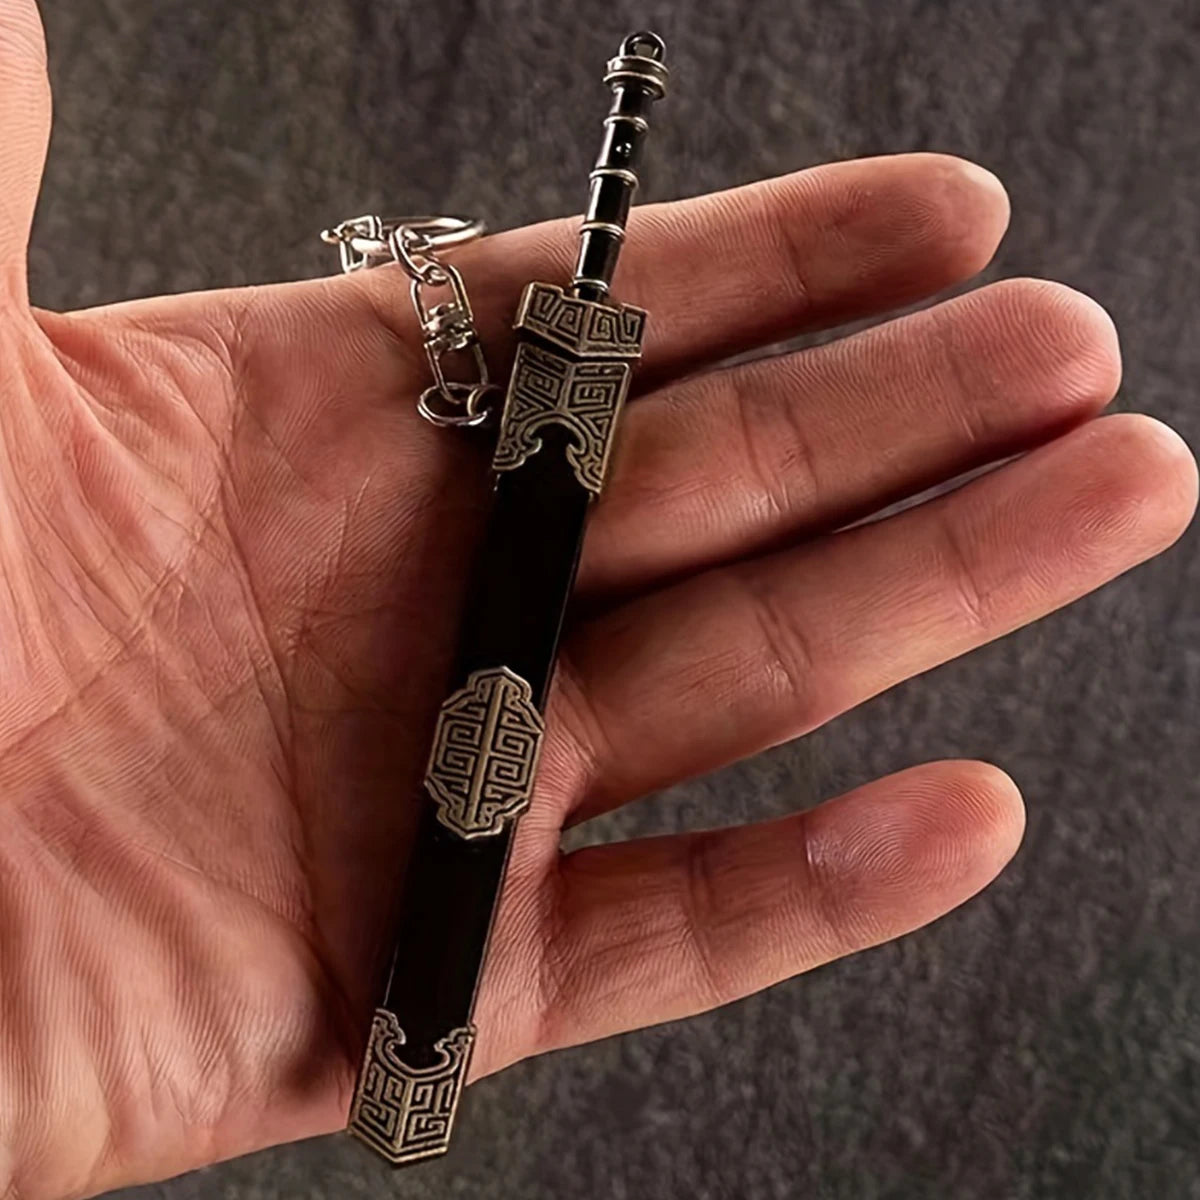 Ancient Chinese Mini Sword KeyChain First Emperor of Qin KeyRing Sword Metal Weapon Toy Key Chain Pendant Cute Keychain